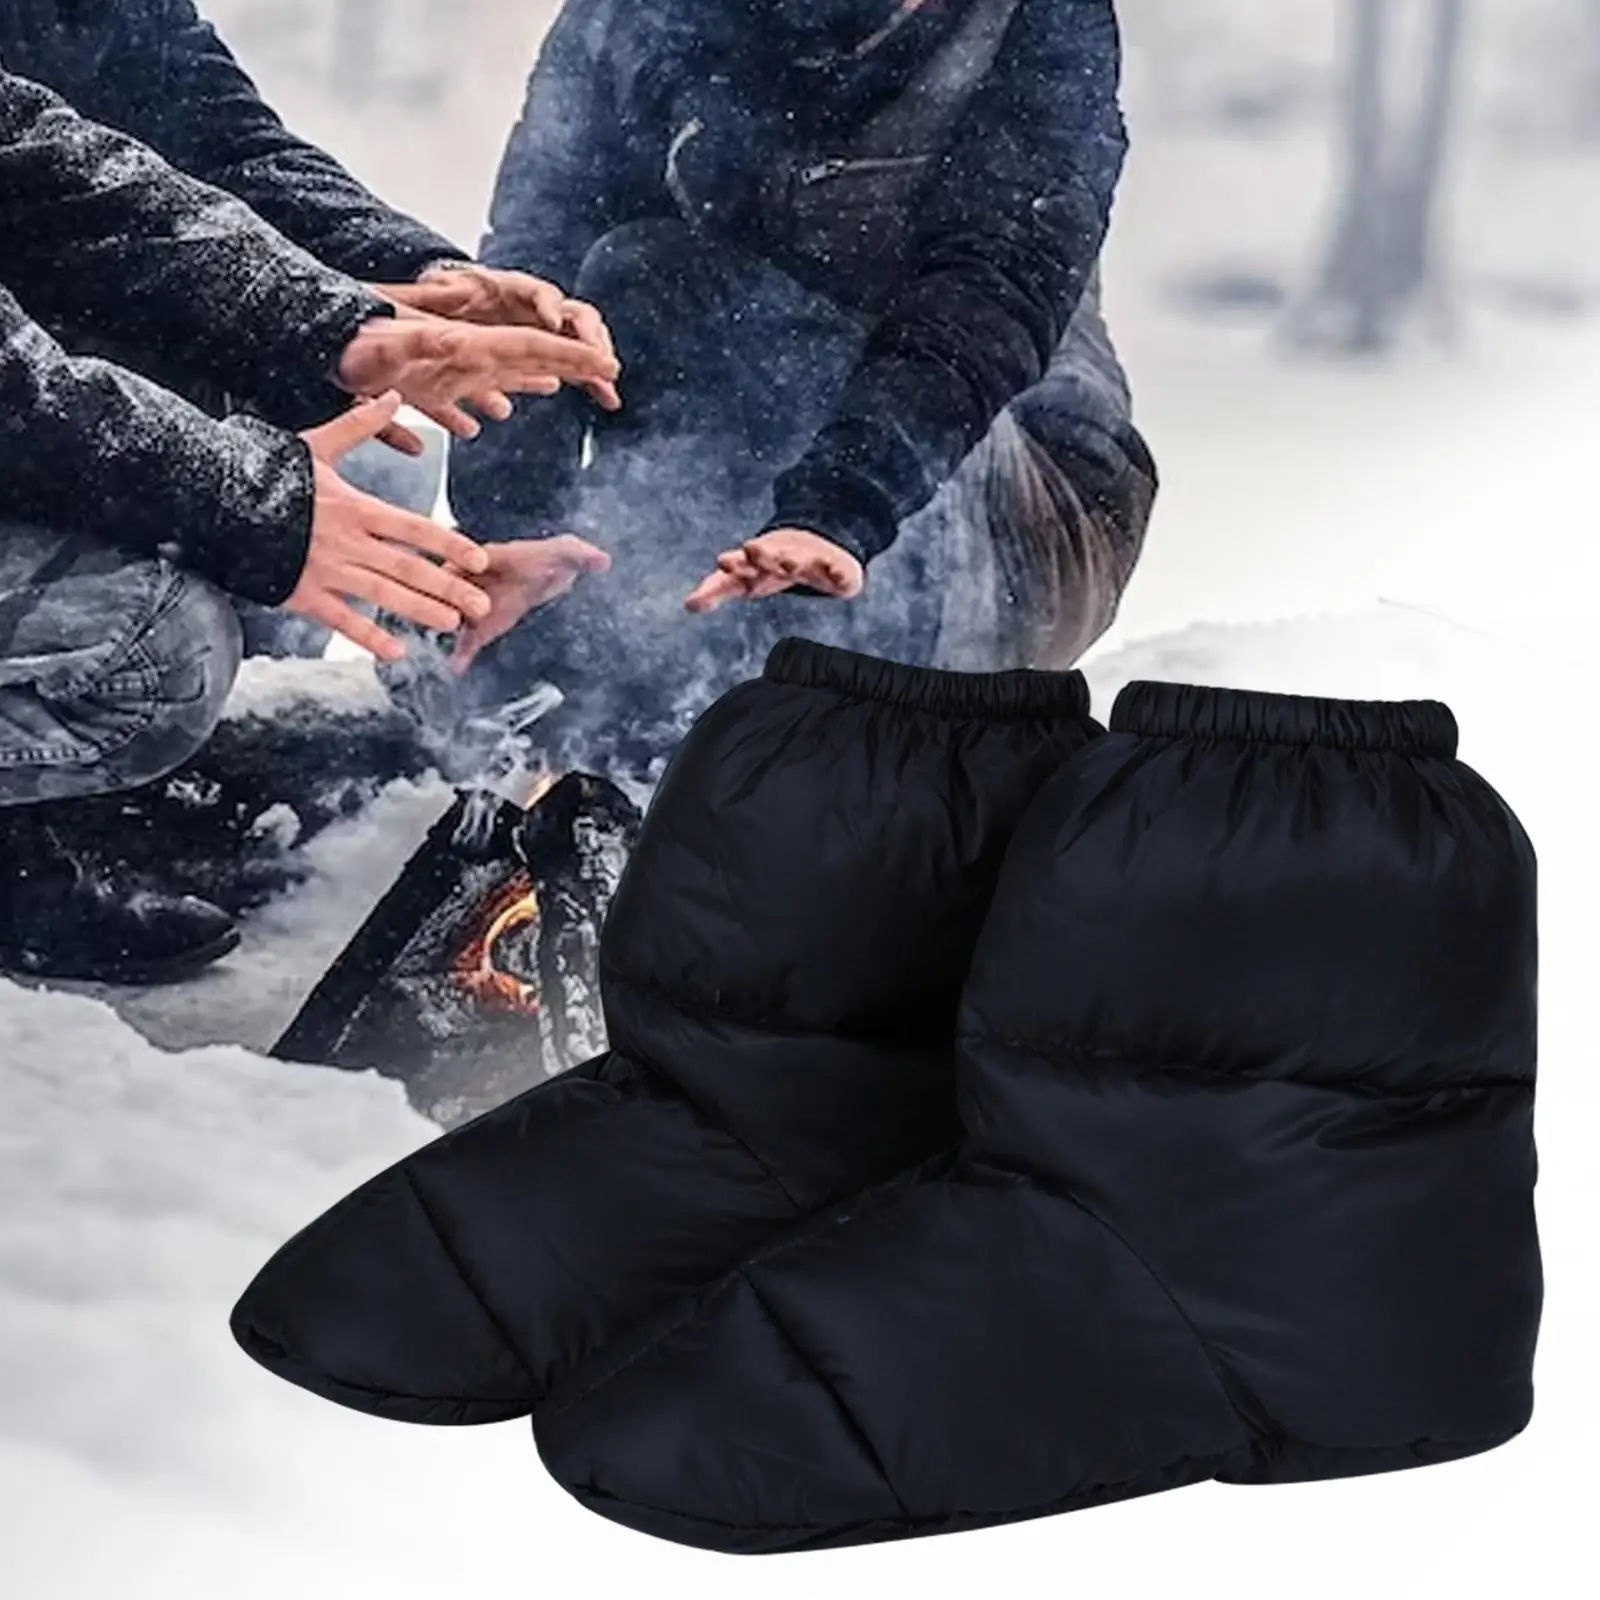 1 Pair Winter Down Slippers Warm Bootie Shoes Lightweight Soft Waterproof Footwear for Fishing Camping Skiing Bedroom Outdoor